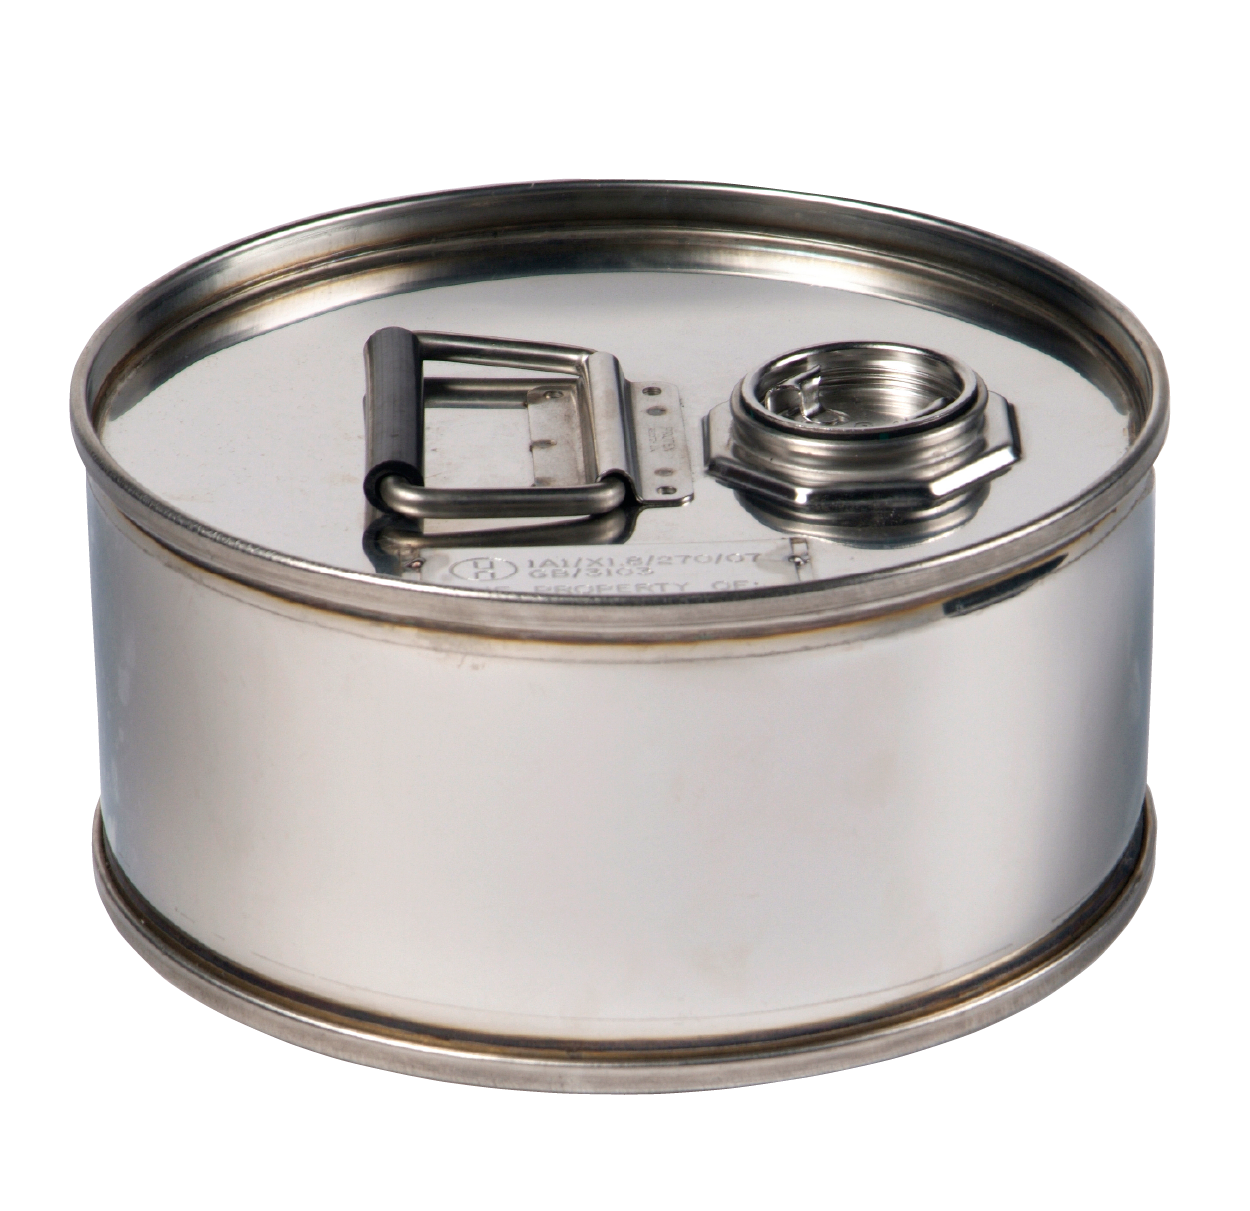 25L UN Stainless Steel Drum, 1A1/X1.8/270